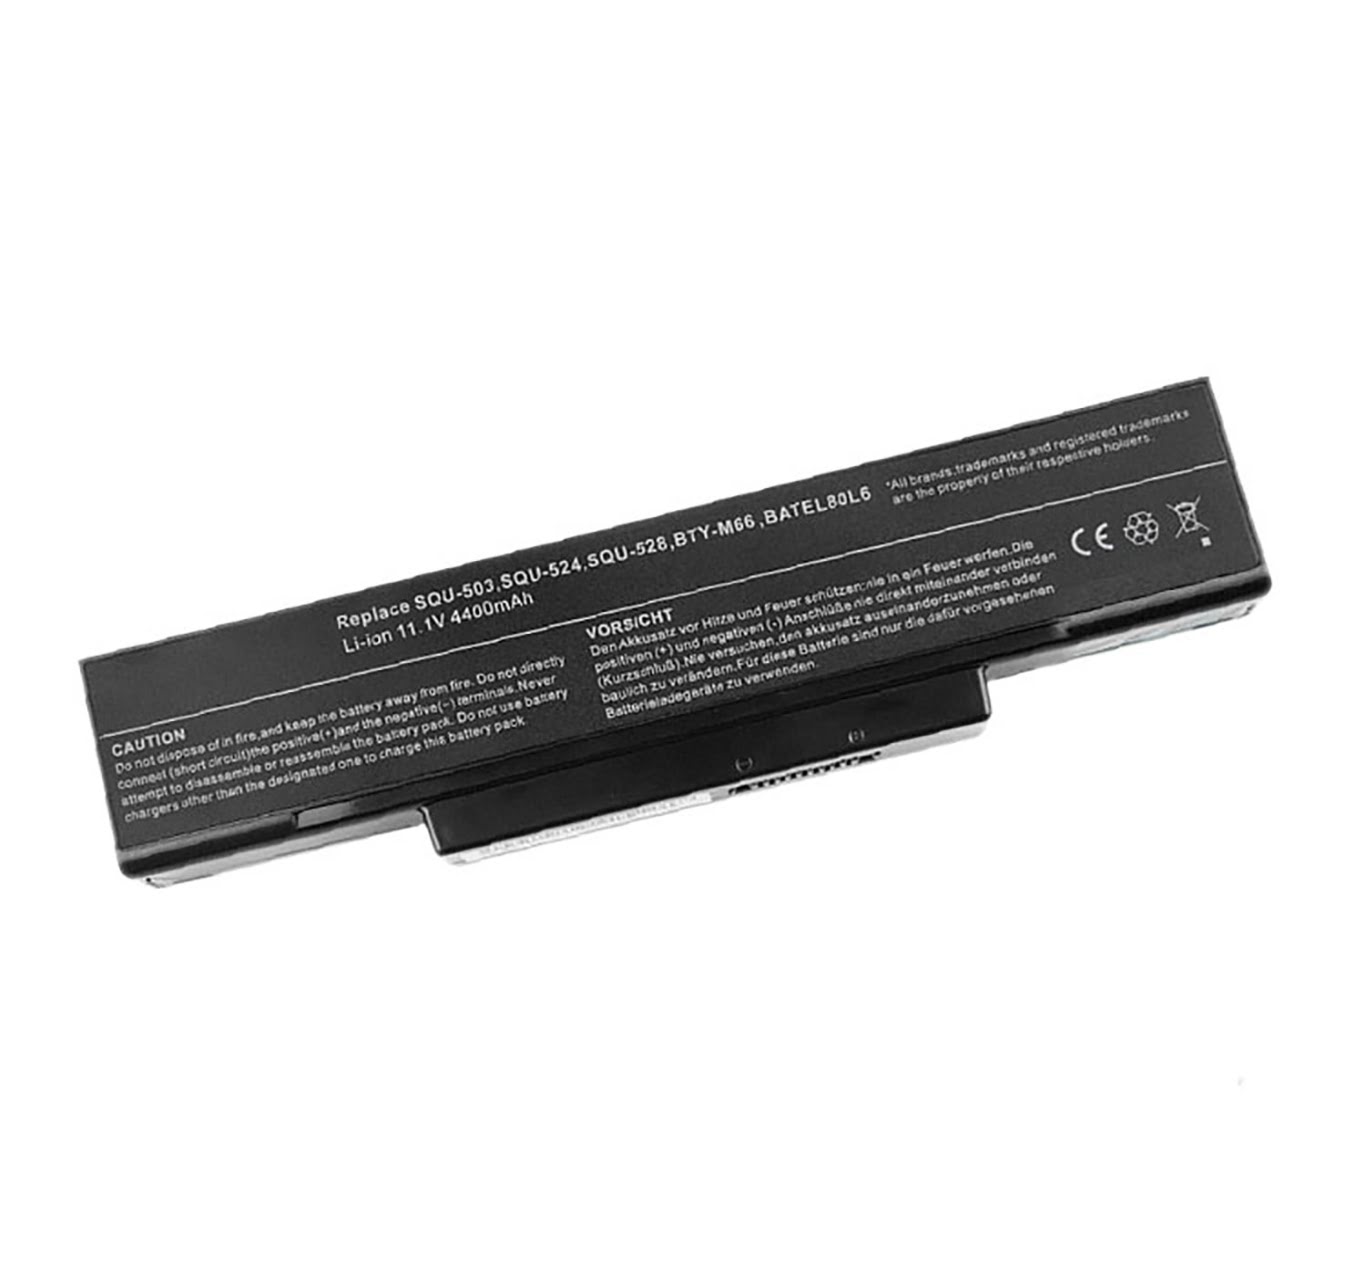 1034T-003, 1916C4230F replacement Laptop Battery for Asus A9, A9000, 6 cells, 11.1V, 4400mAh